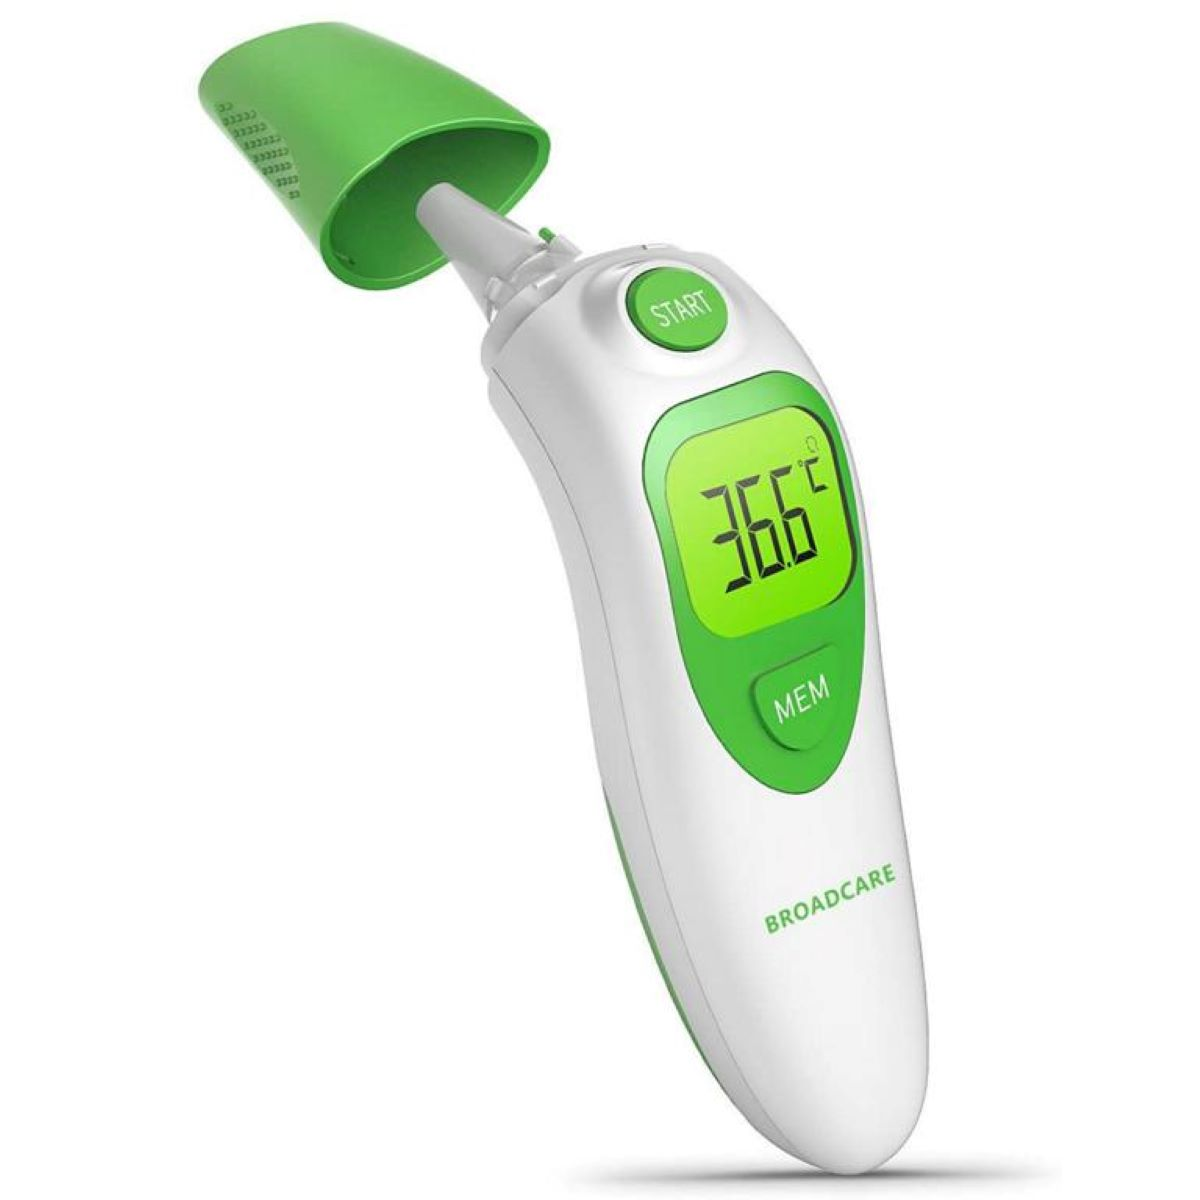 BROADCARE BC-2013/bc-2003 Thermometer Stirn) der (Messart: an